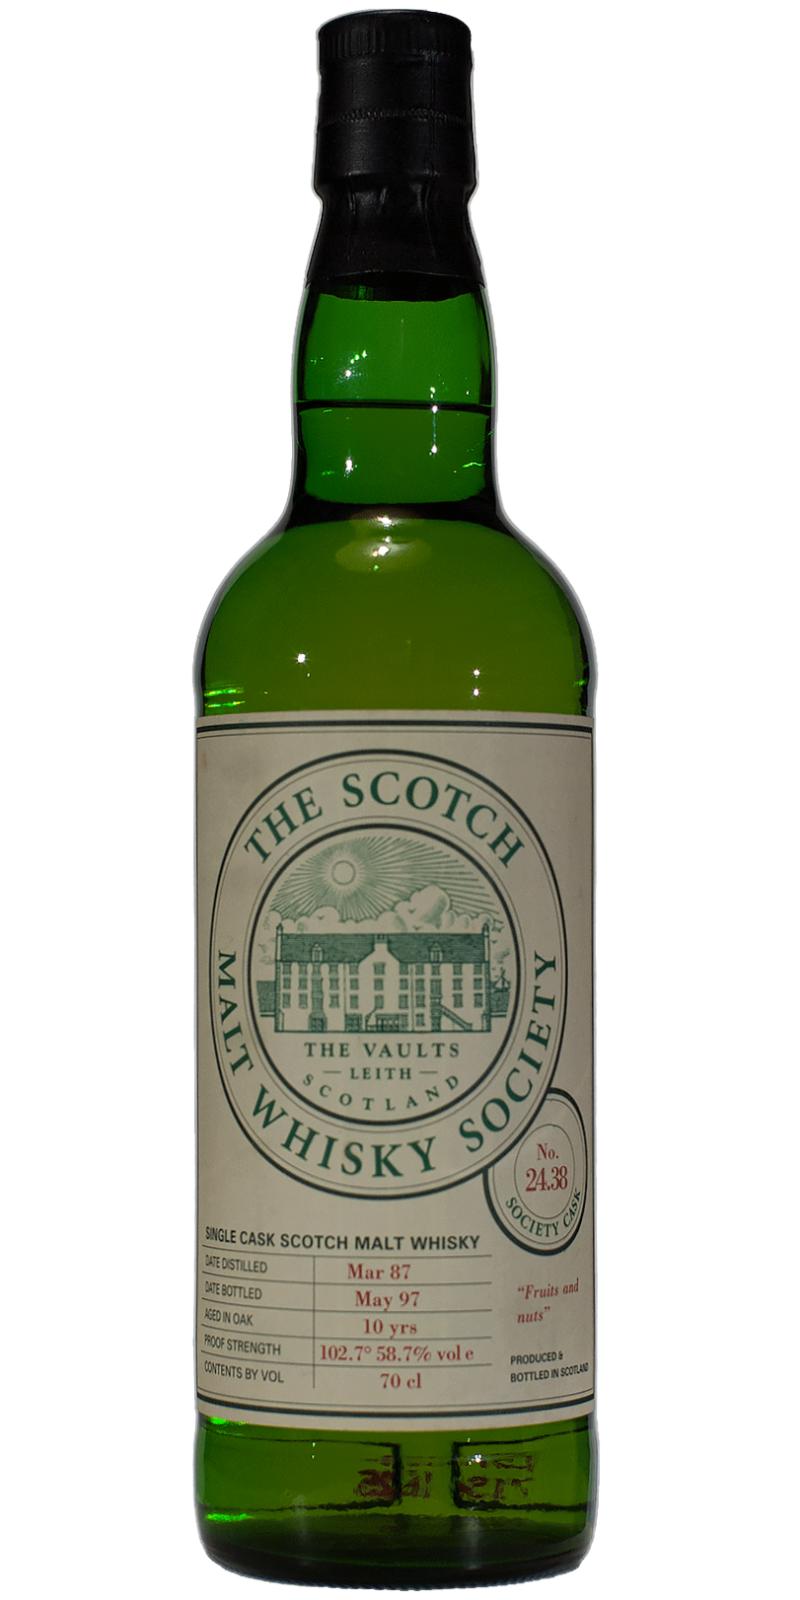 Macallan 1987 SMWS 24.38 Fruits and nuts 24.38 58.7% 700ml